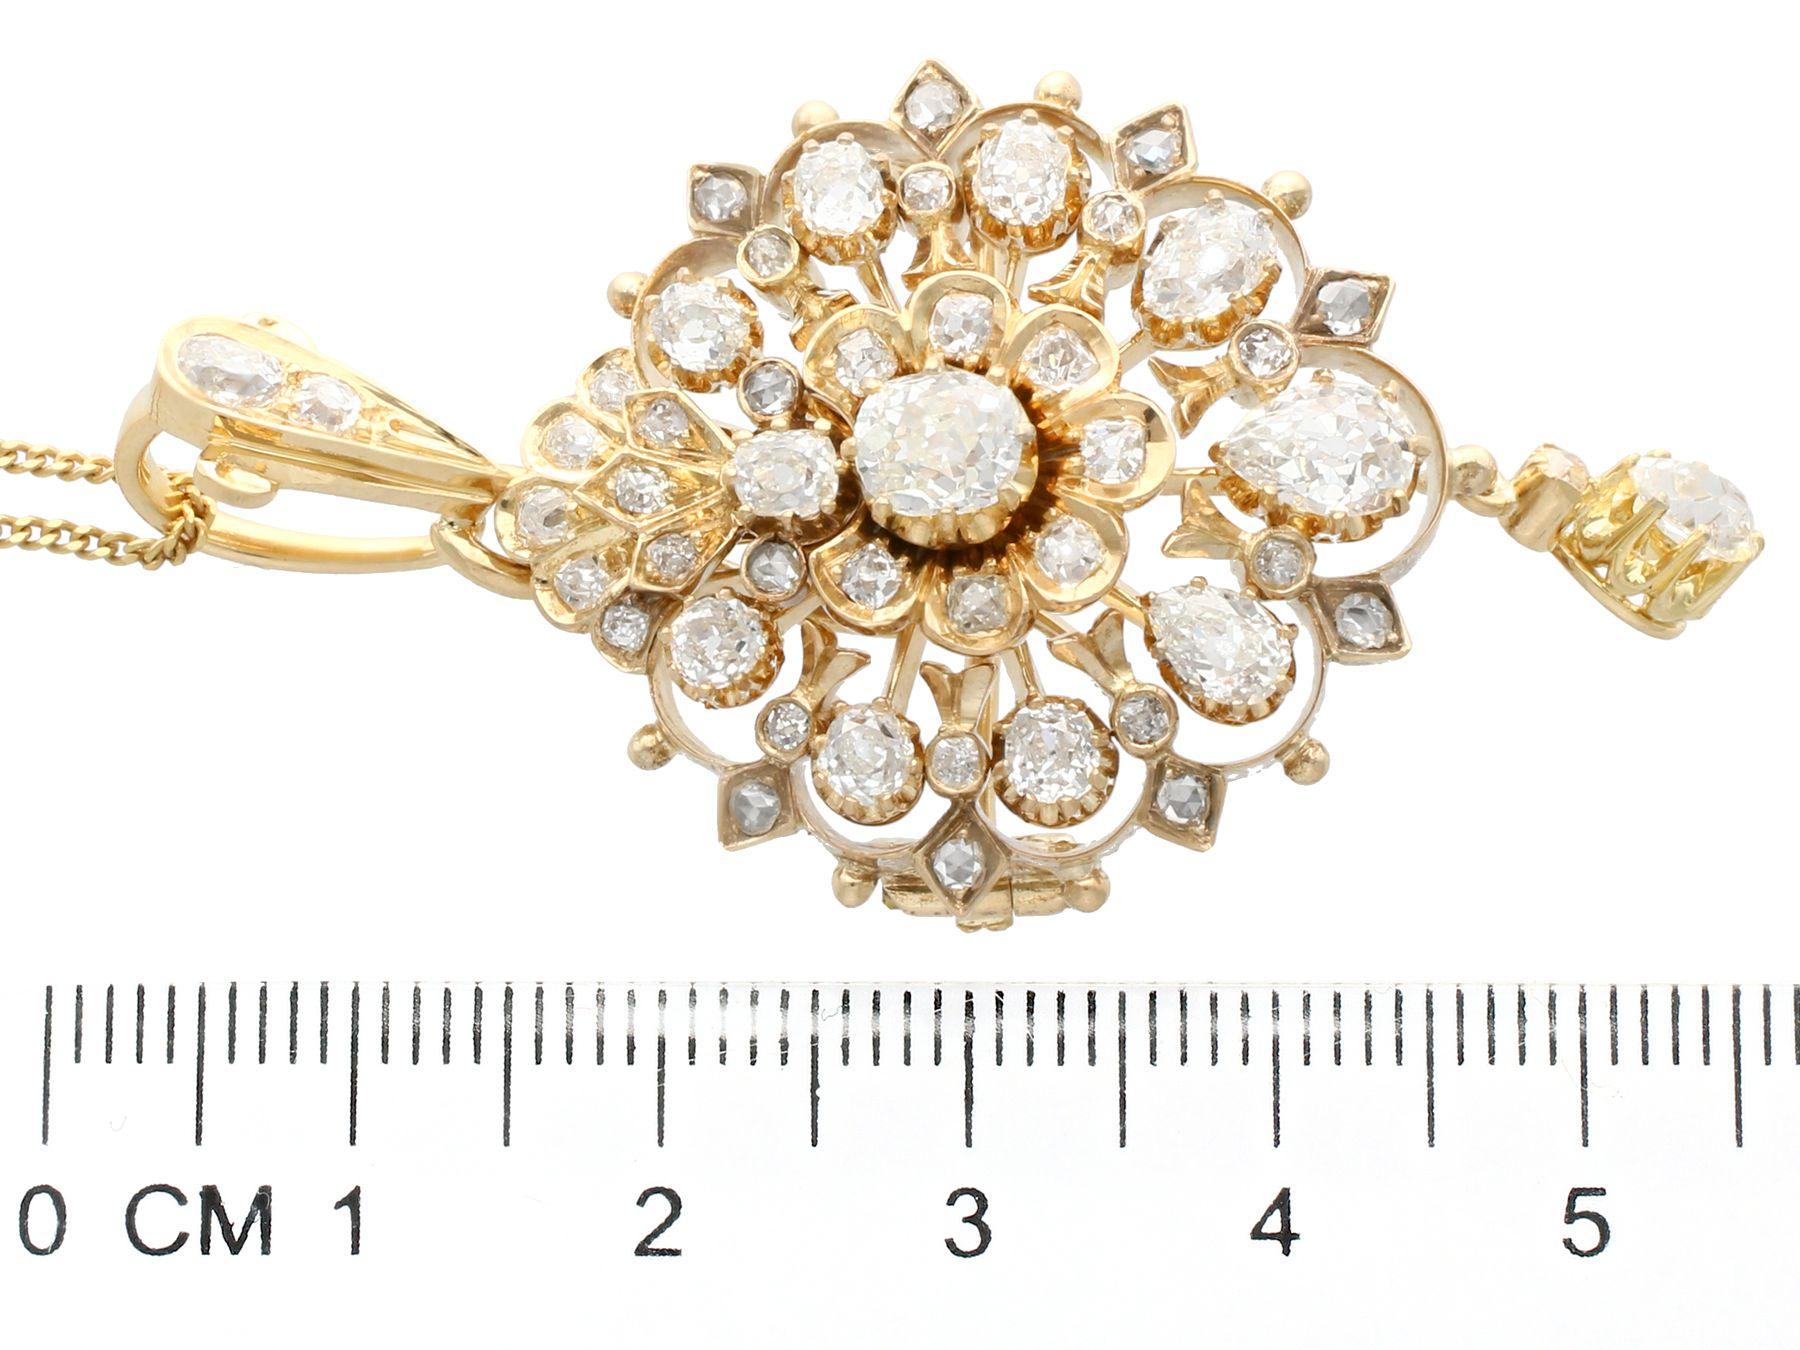 Antique 5.06 Carat Diamond and Yellow Gold Pendant or Brooch 4